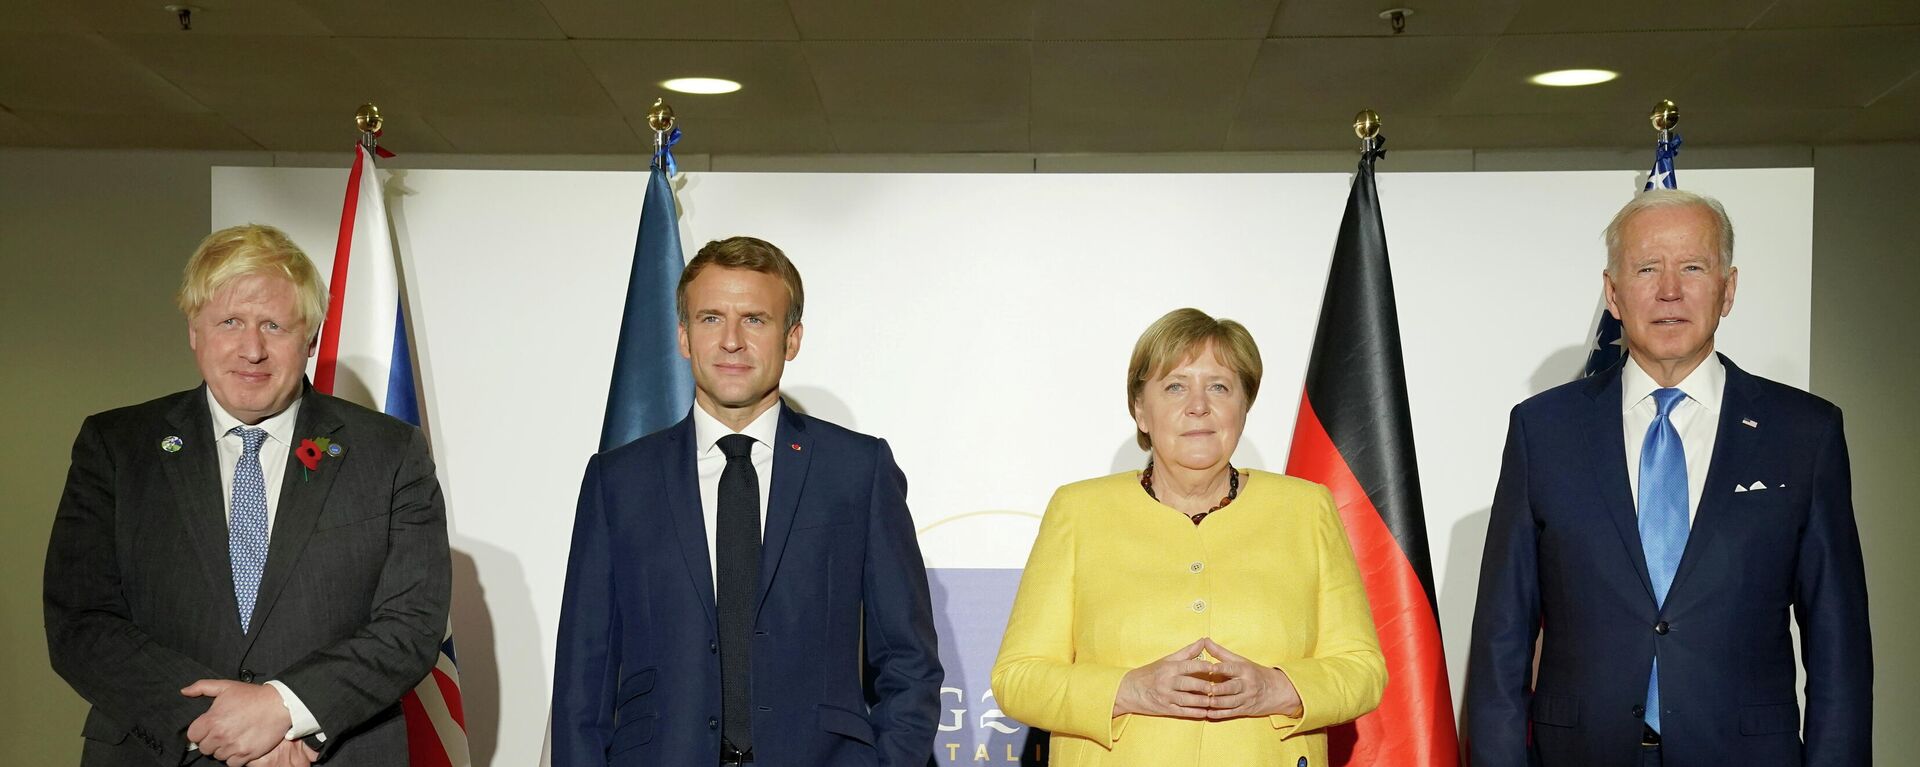 U.S. President Joe Biden, Germany's Chancellor Angela Merkel, Britain's Prime Minister Boris Johnson and France's President Emmanuel Macron pose for a family photo during their meeting to discuss Iran's nuclear program, on the sidelines of the G20 leaders' summit in Rome, Italy October 30, 2021. - Sputnik International, 1920, 30.10.2021